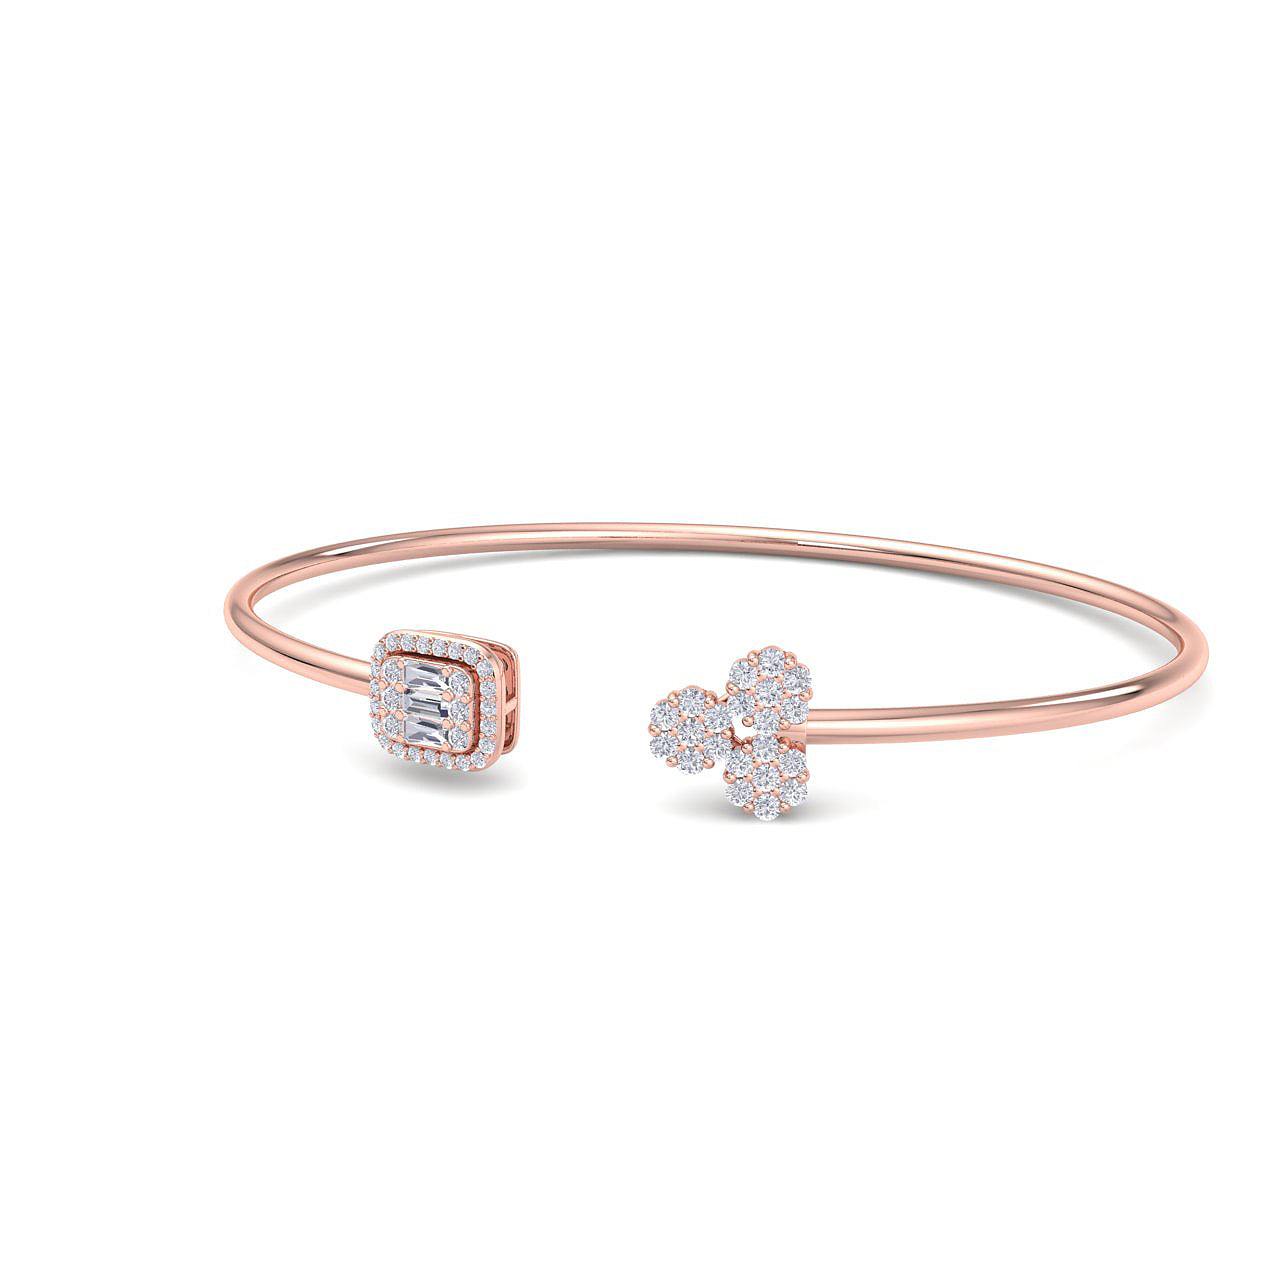 Bracelet in rose gold with white diamonds of 0.58 ct in weight